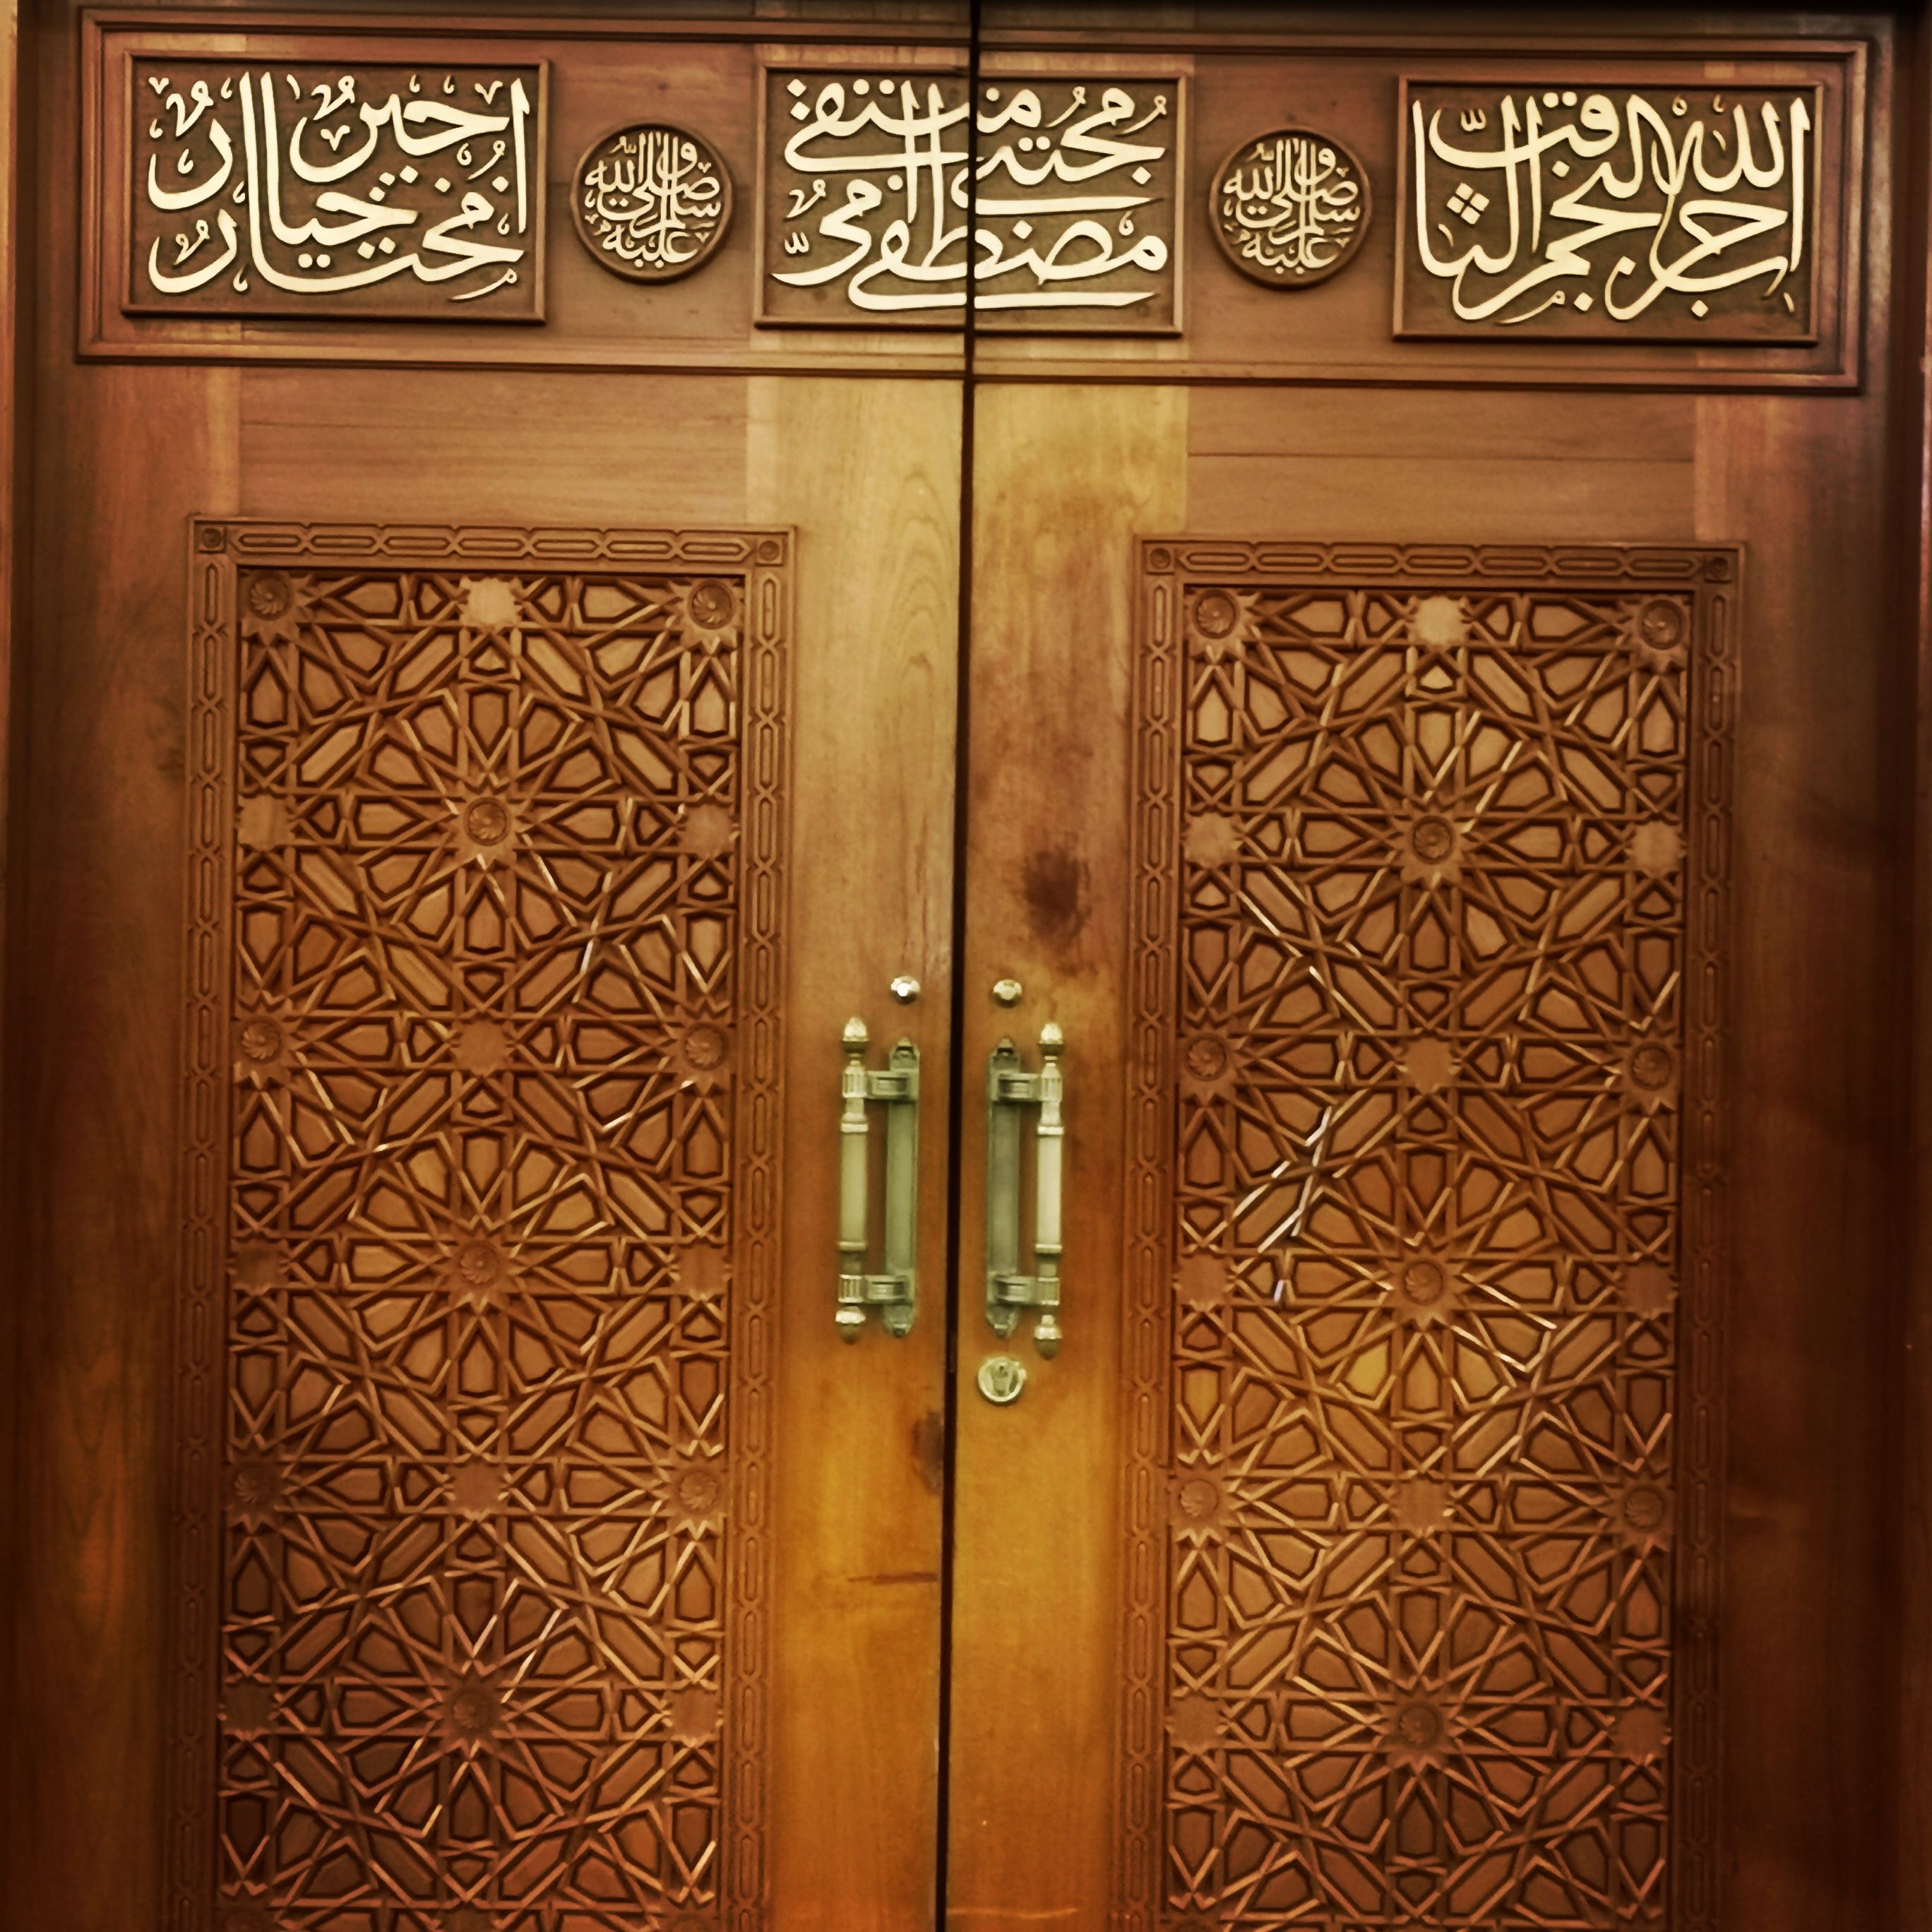 Islamic inscriptions on one of the gates.